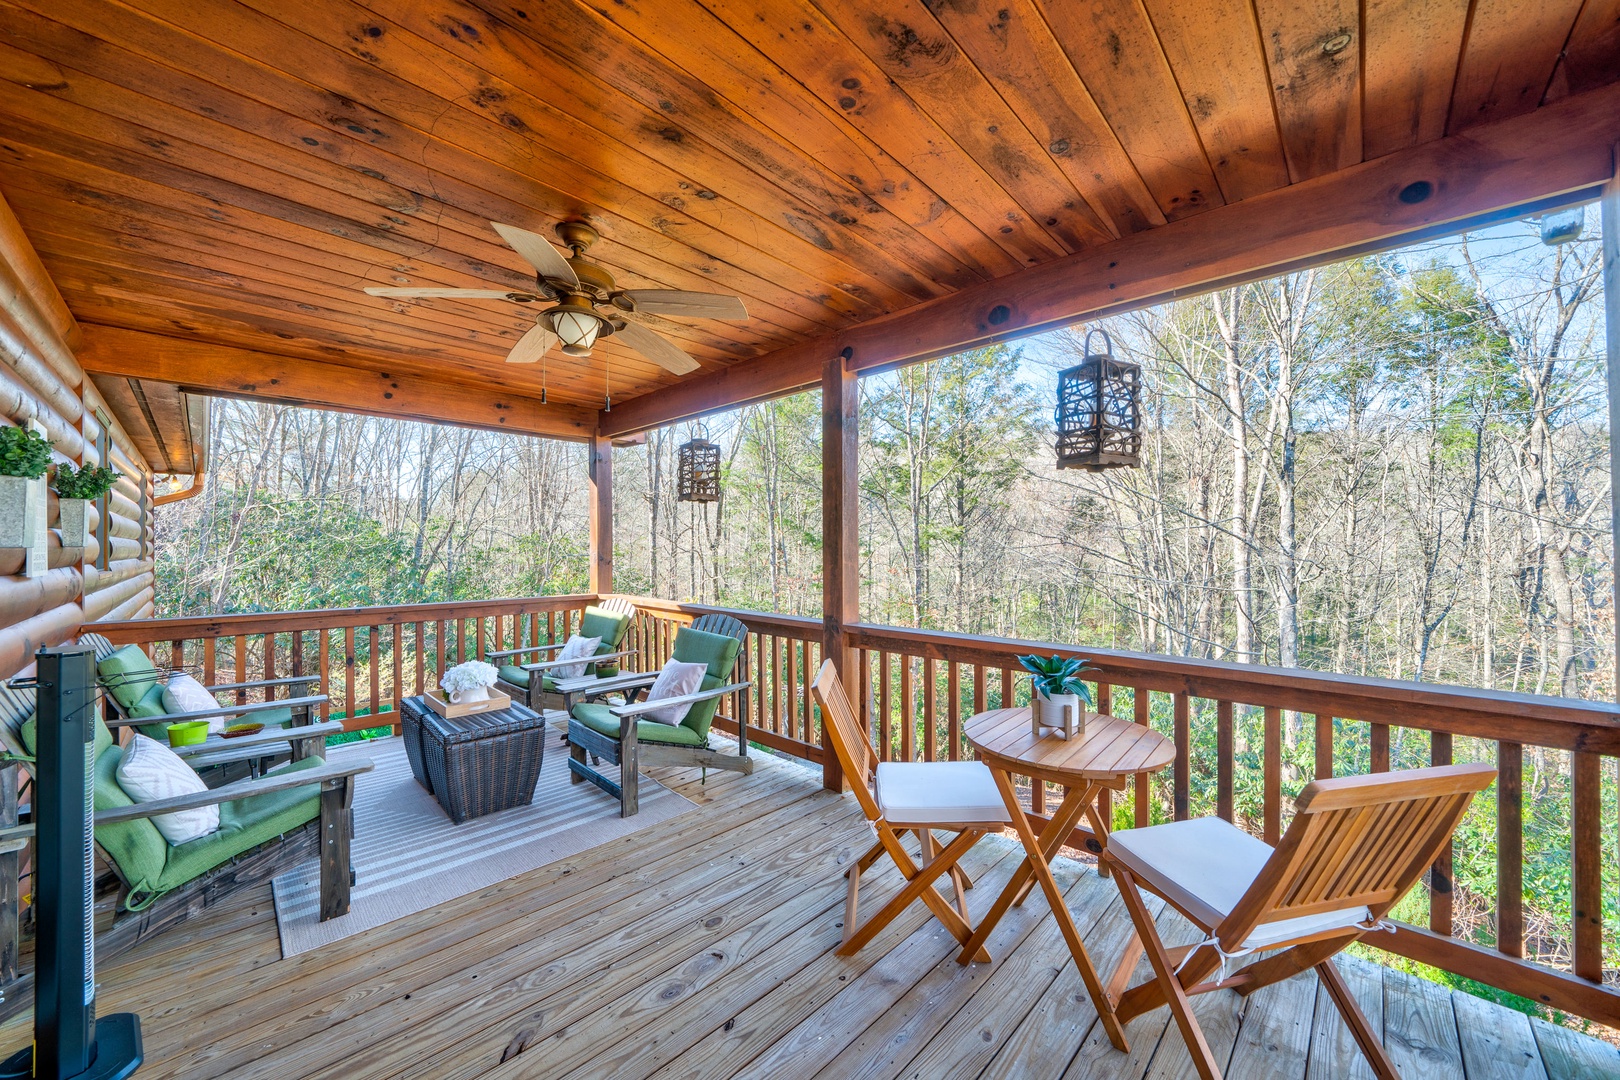 Savor the crisp breeze on the porch with comfortable outdoor seating